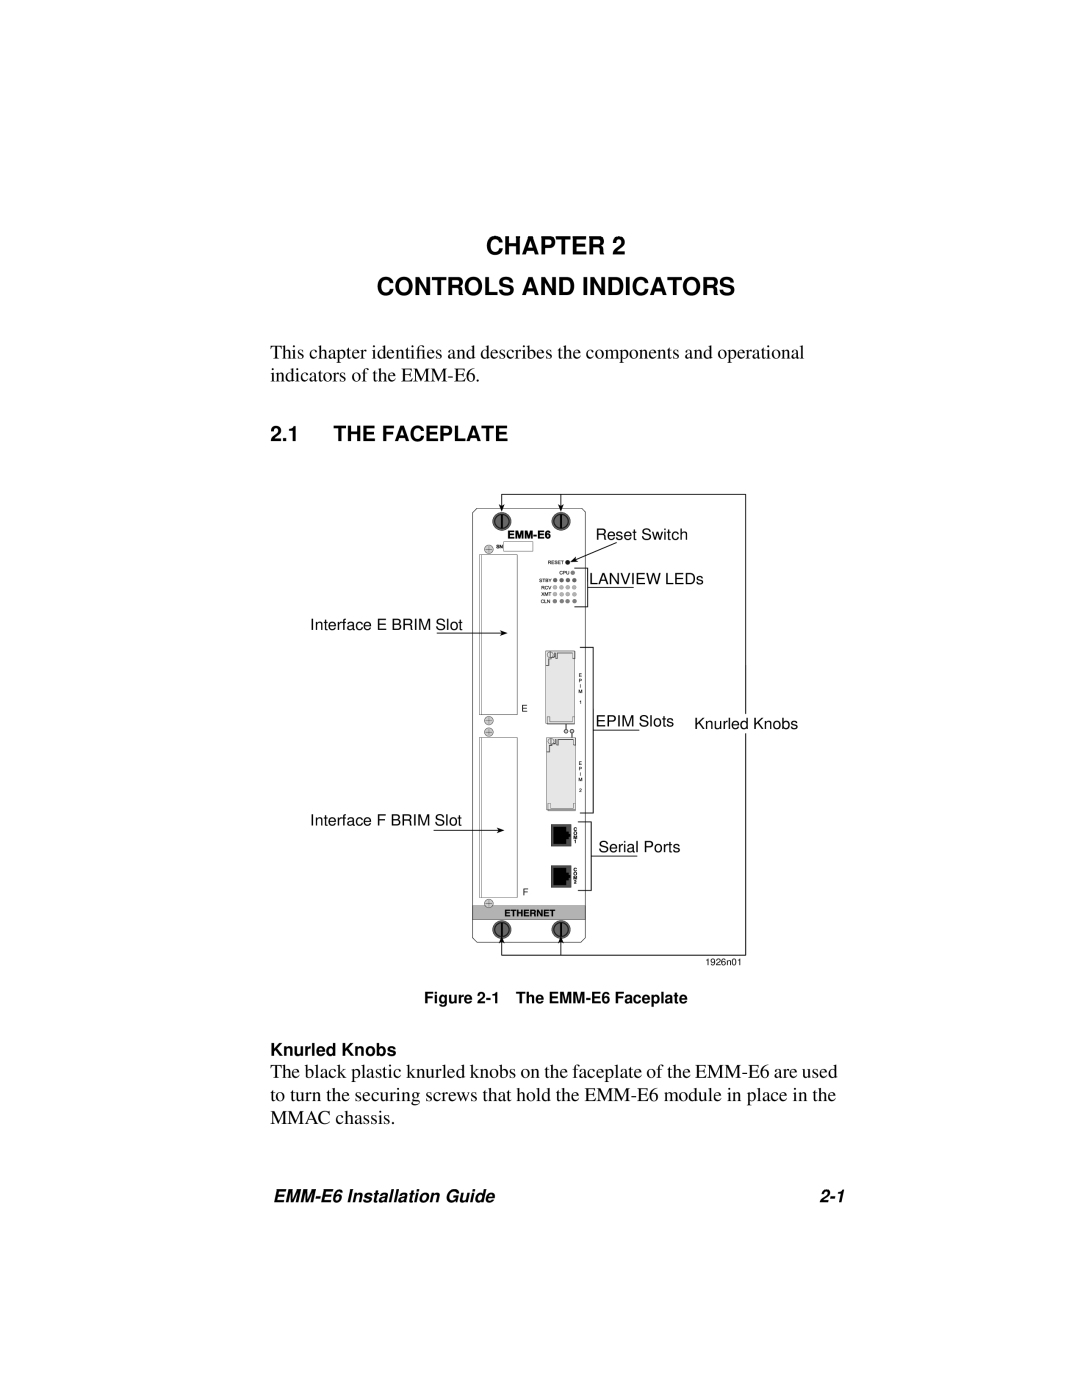 Cabletron Systems EMM-E6 manual Chapter Controls And Indicators, The Faceplate 